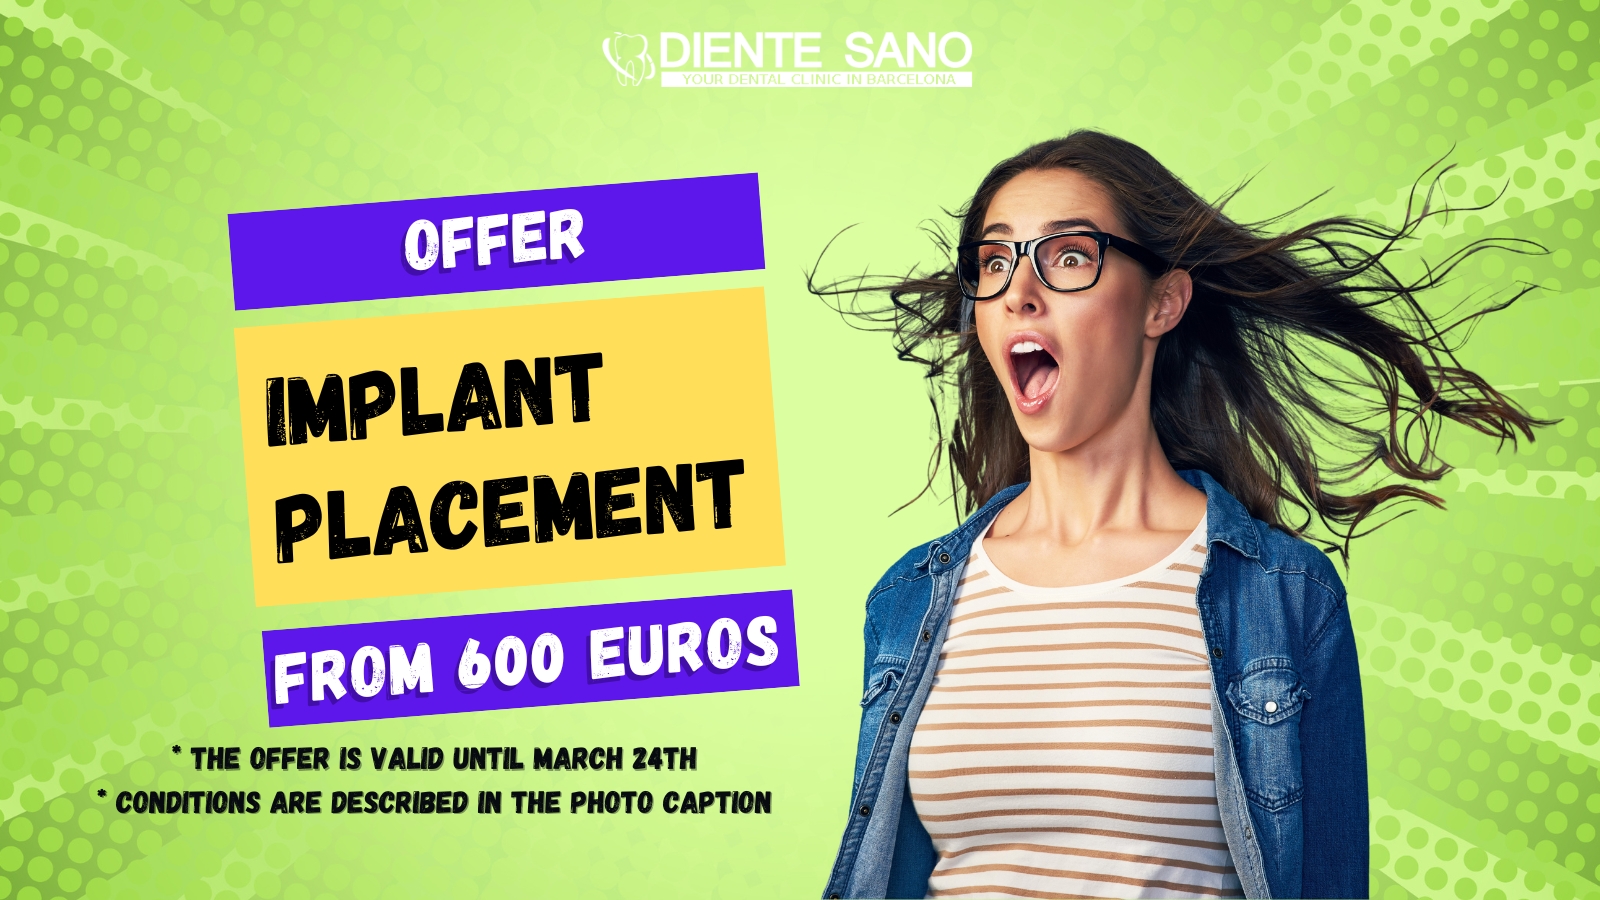 Discover the path to the perfect smile with high-quality solutions from Diente Sano Dental Clinic in Barcelona! We offer you the installation of implants from a Spanish manufacturer at a special price starting from 600 euros. This is your chance to restore the beauty and functionality of your smile with products you can trust.